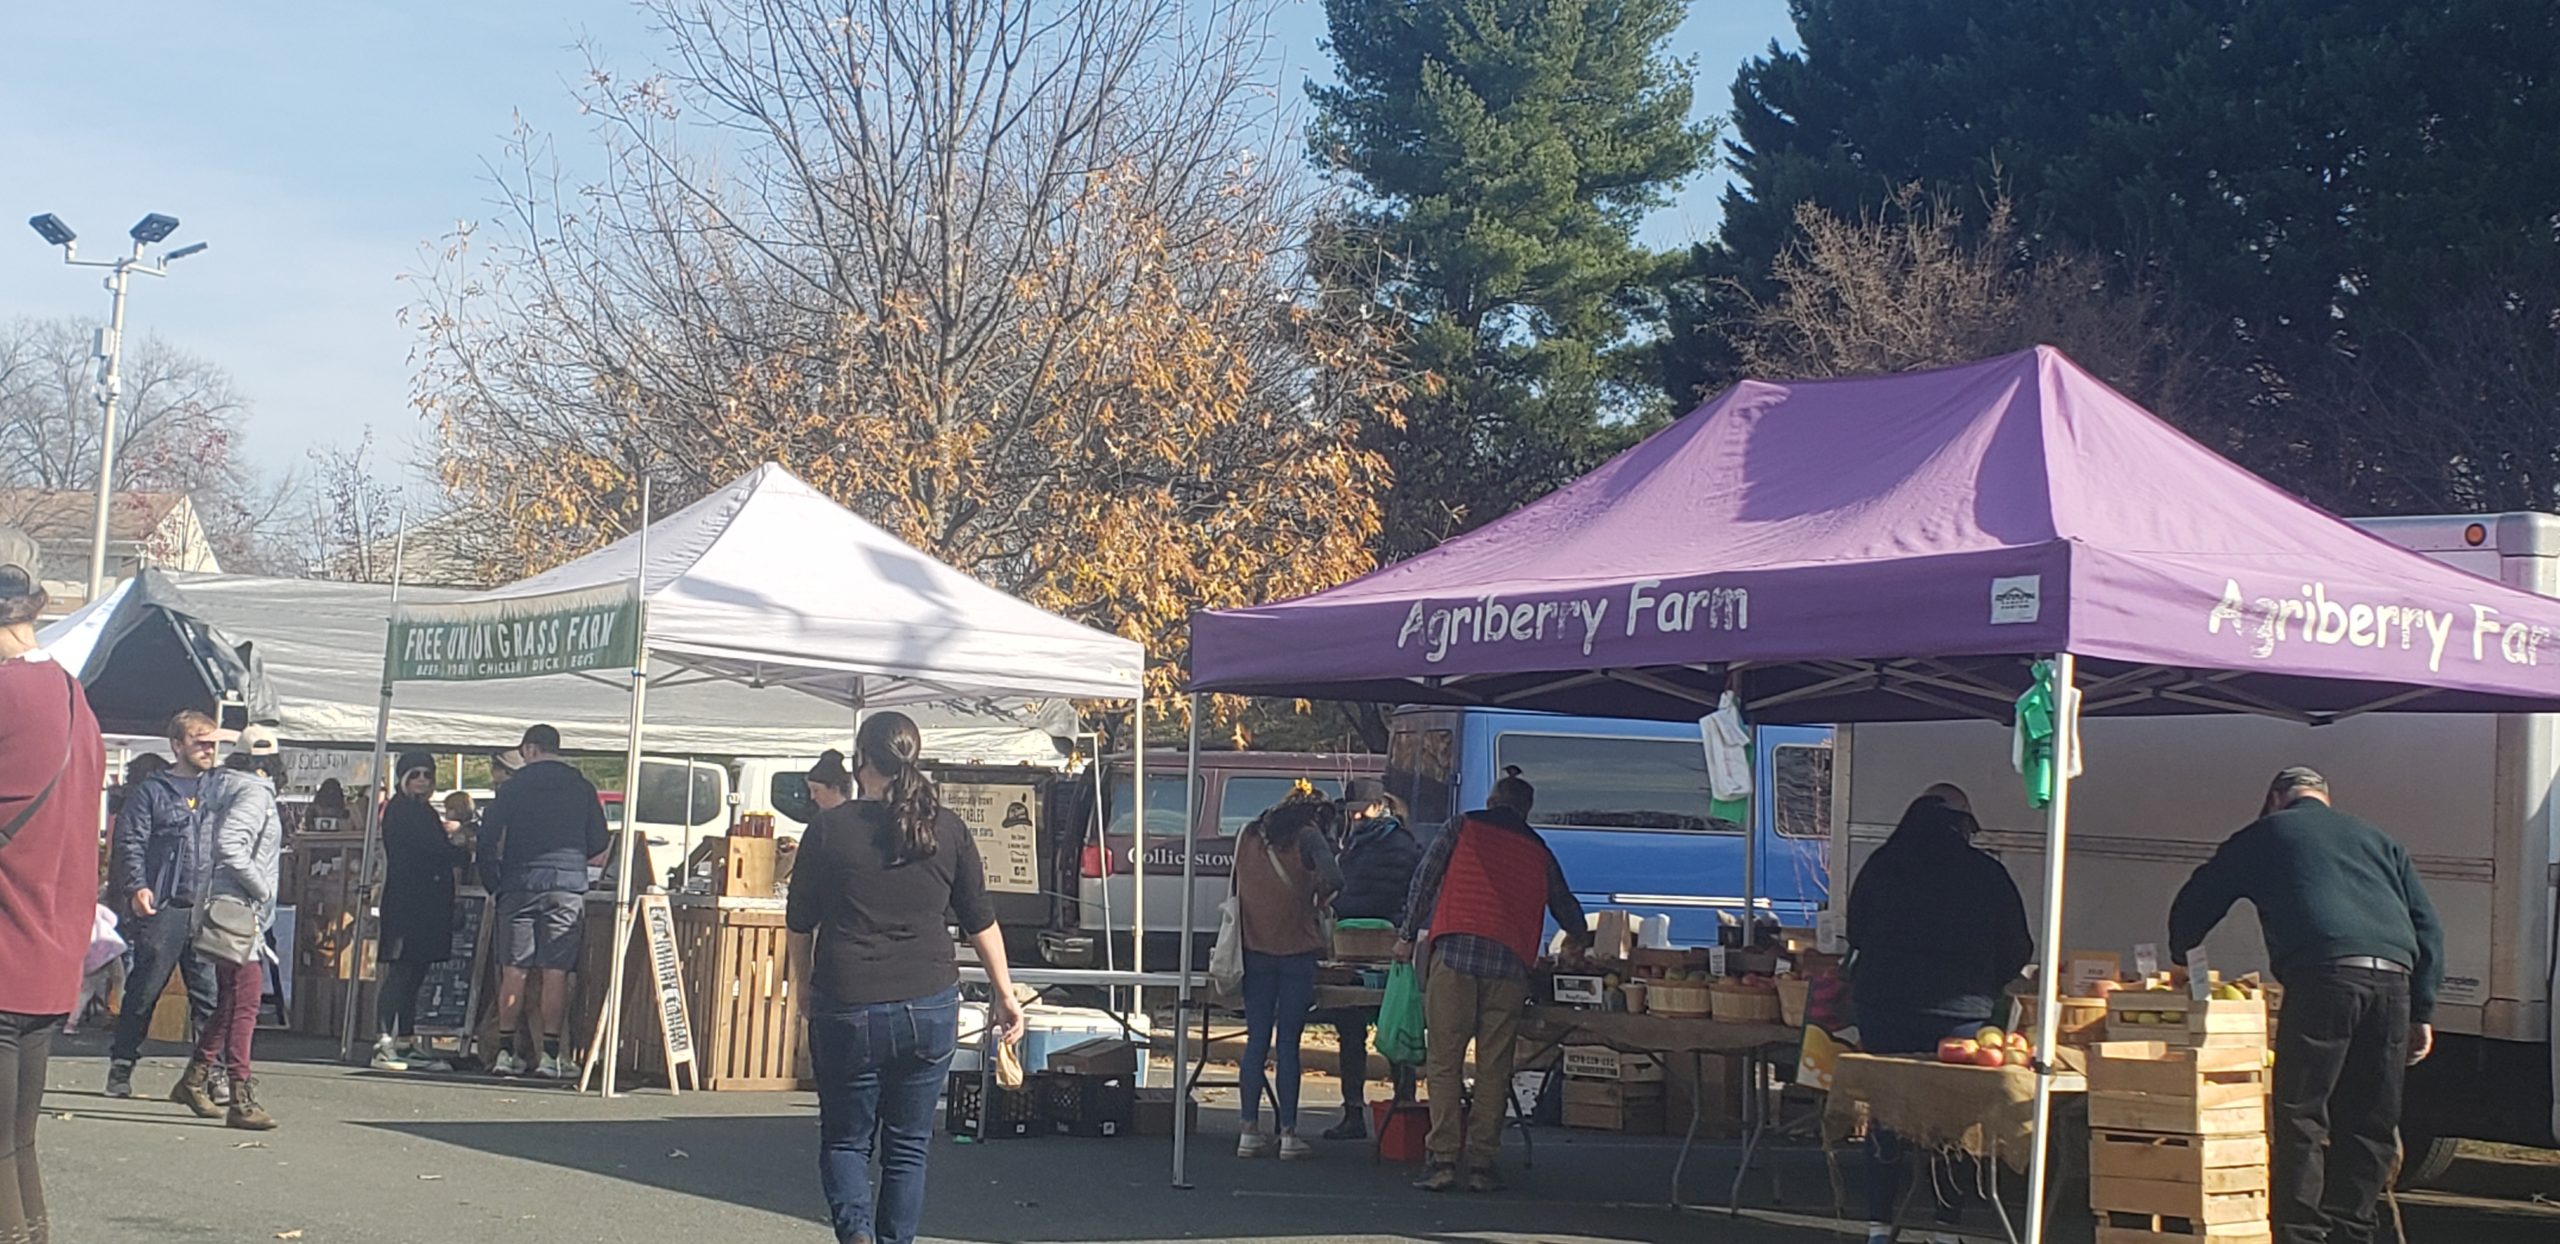 Several people browse several stalls selling fresh produce and other food at the IX Farmers Market